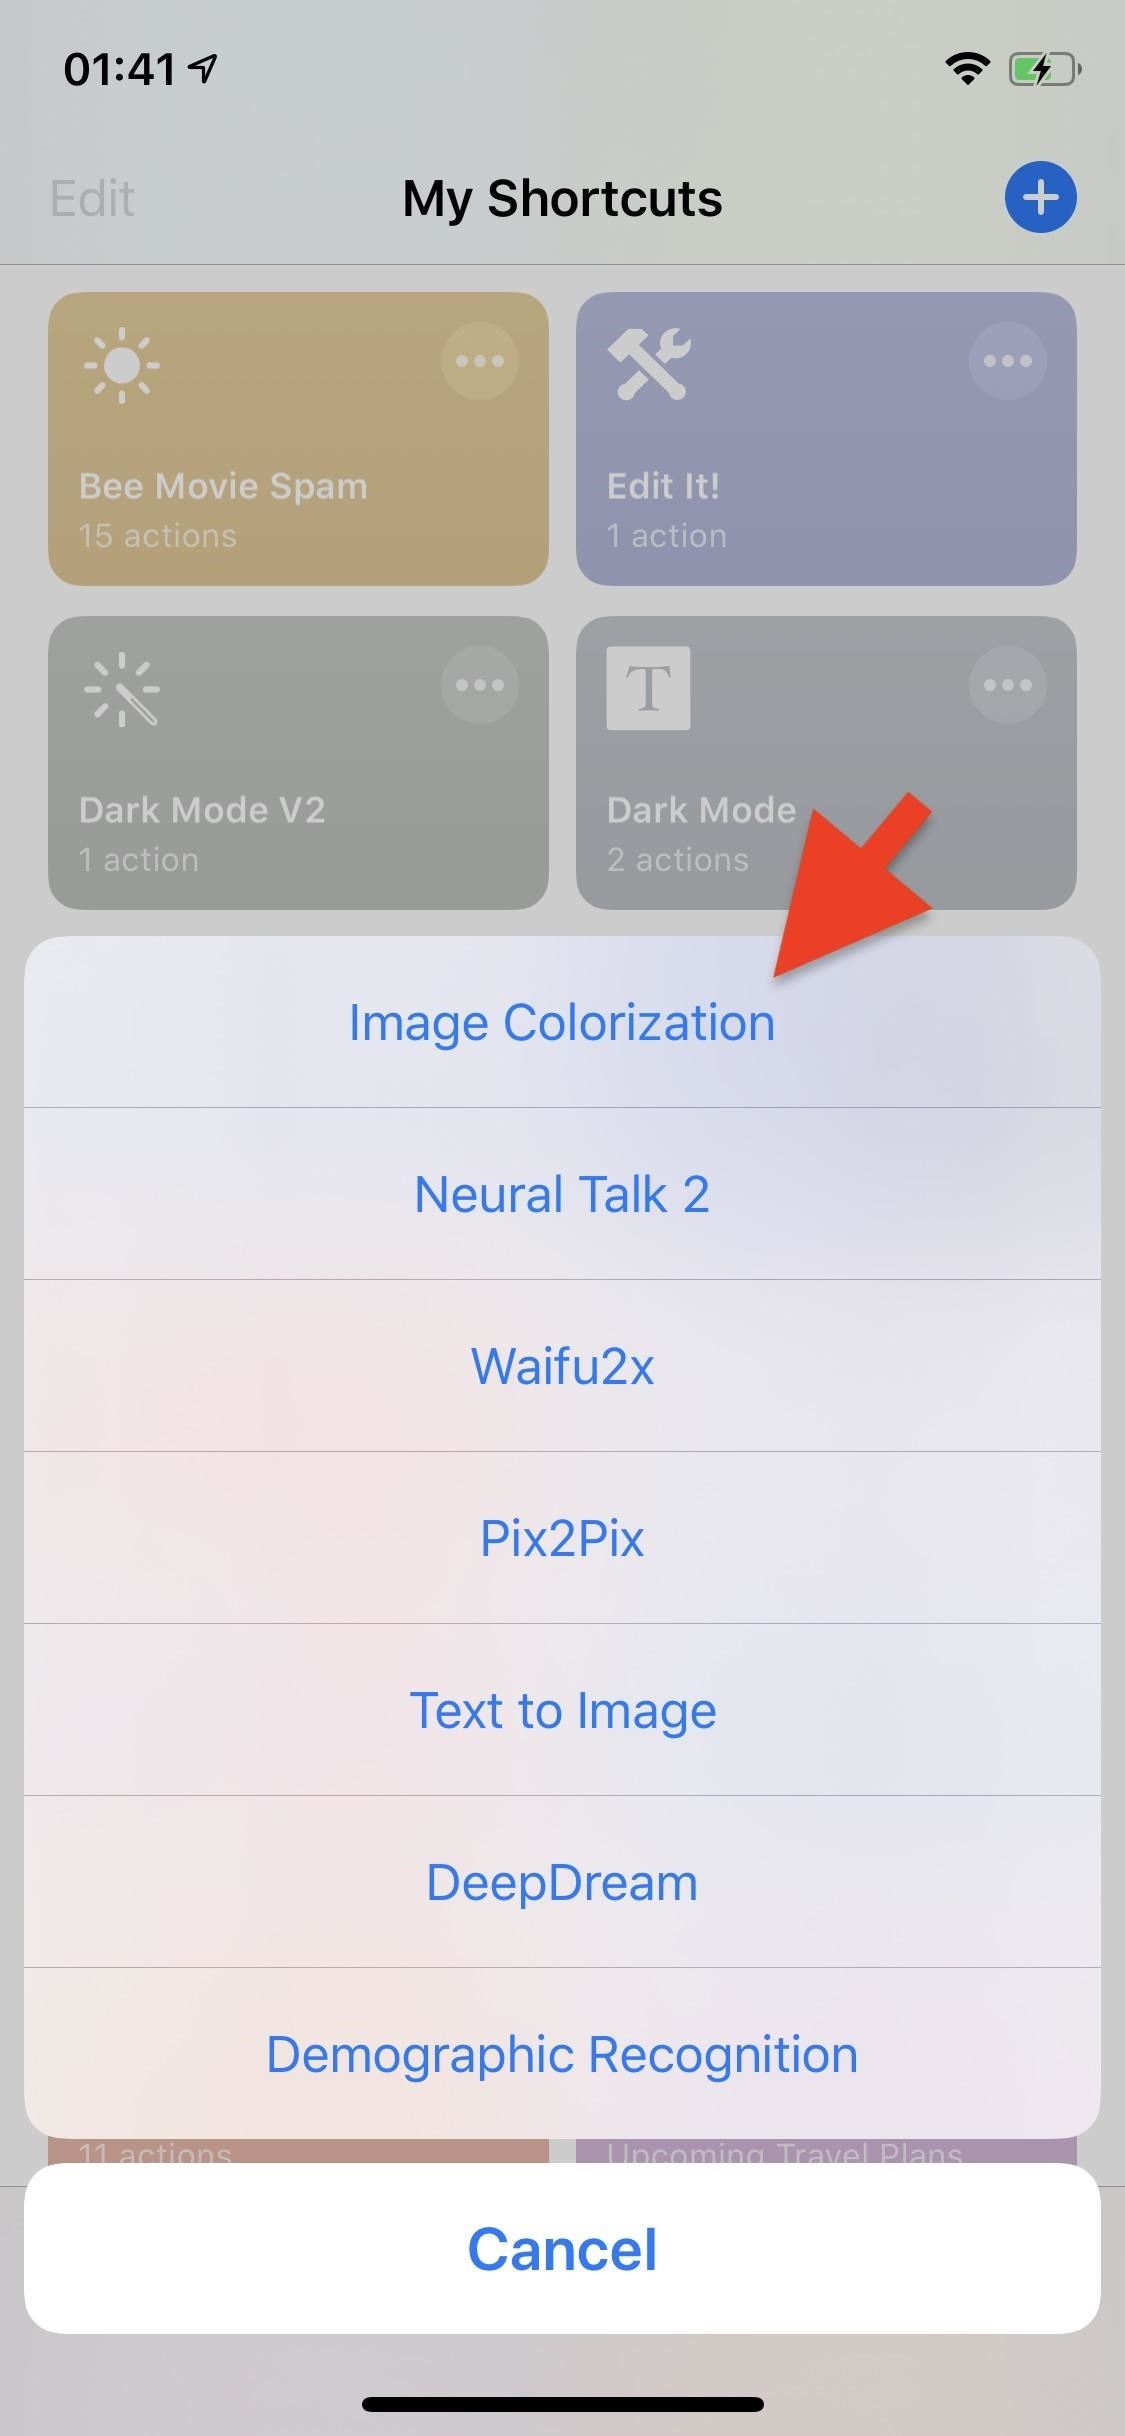 How to Colorize Black & White Photos on Your iPhone via Shortcuts